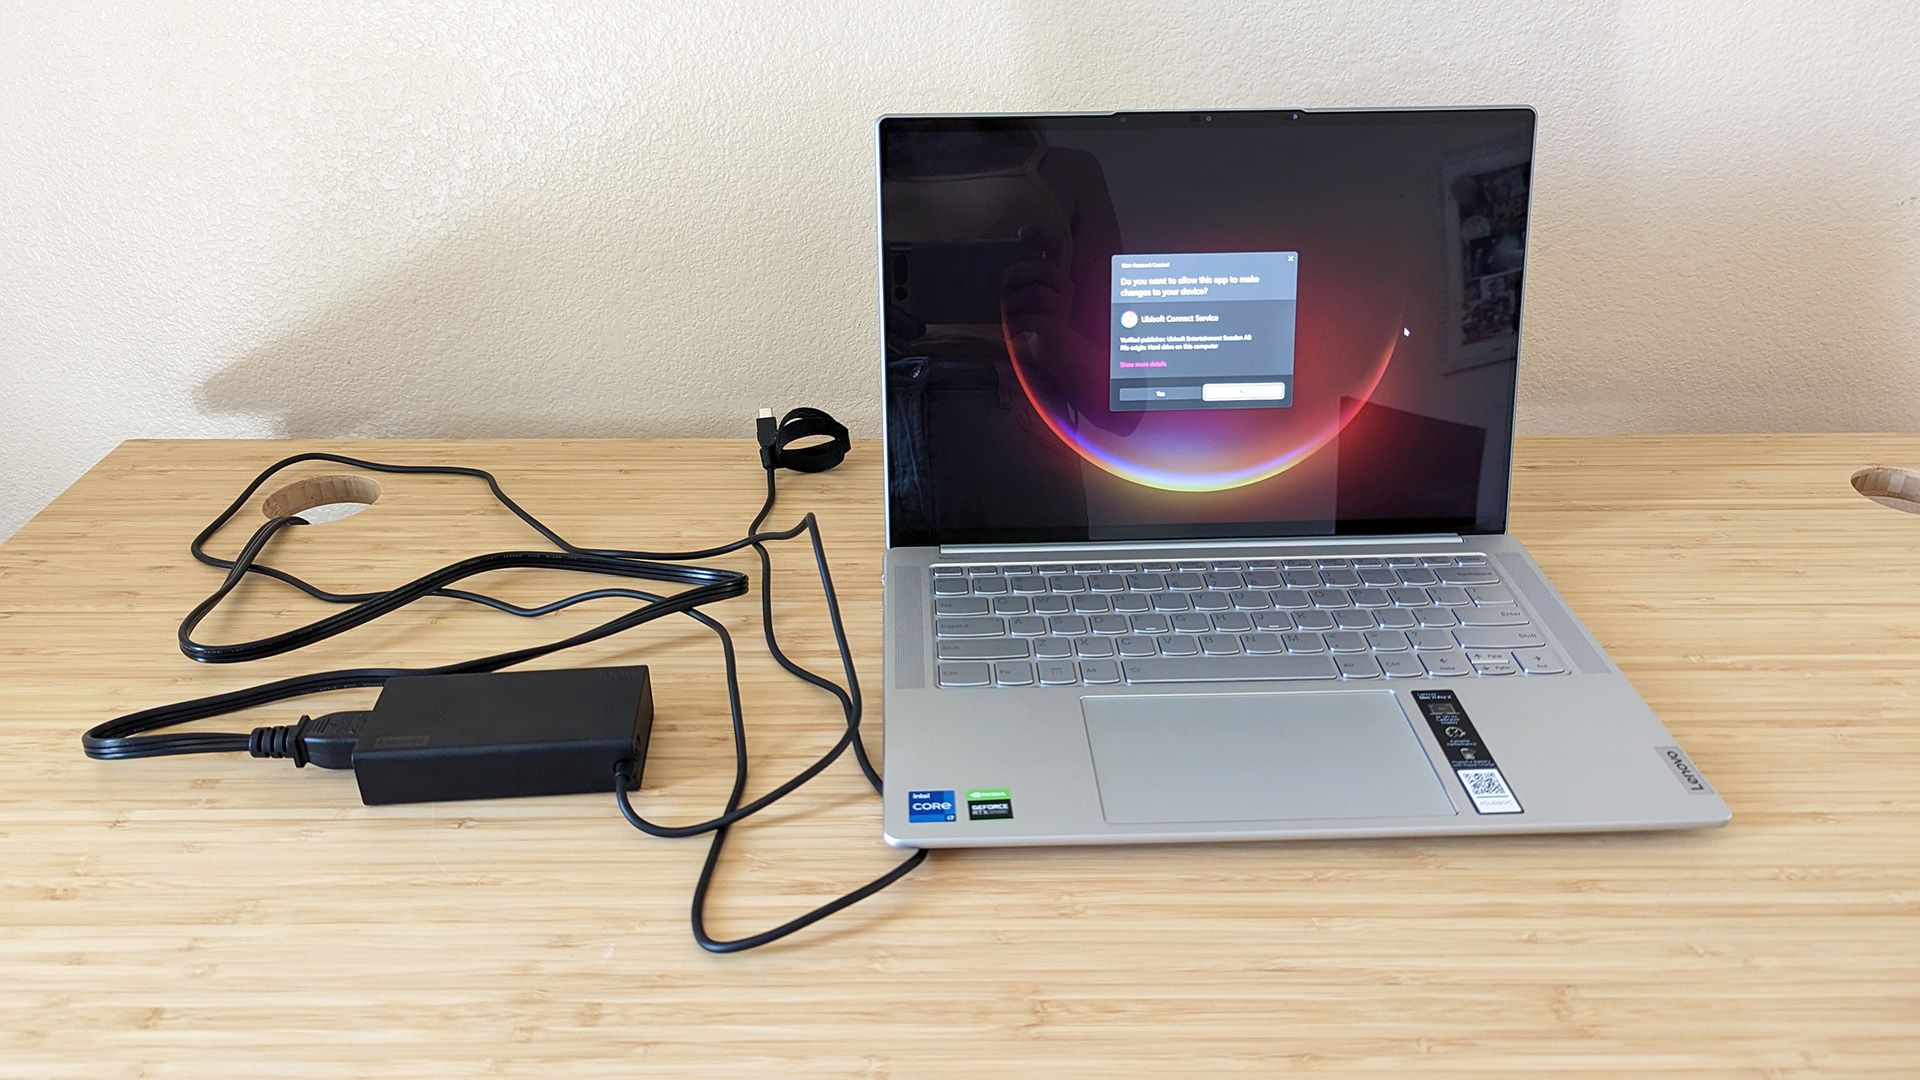 The Lenovo Slim 7i Pro X laptop on a desk with the AC adapter.